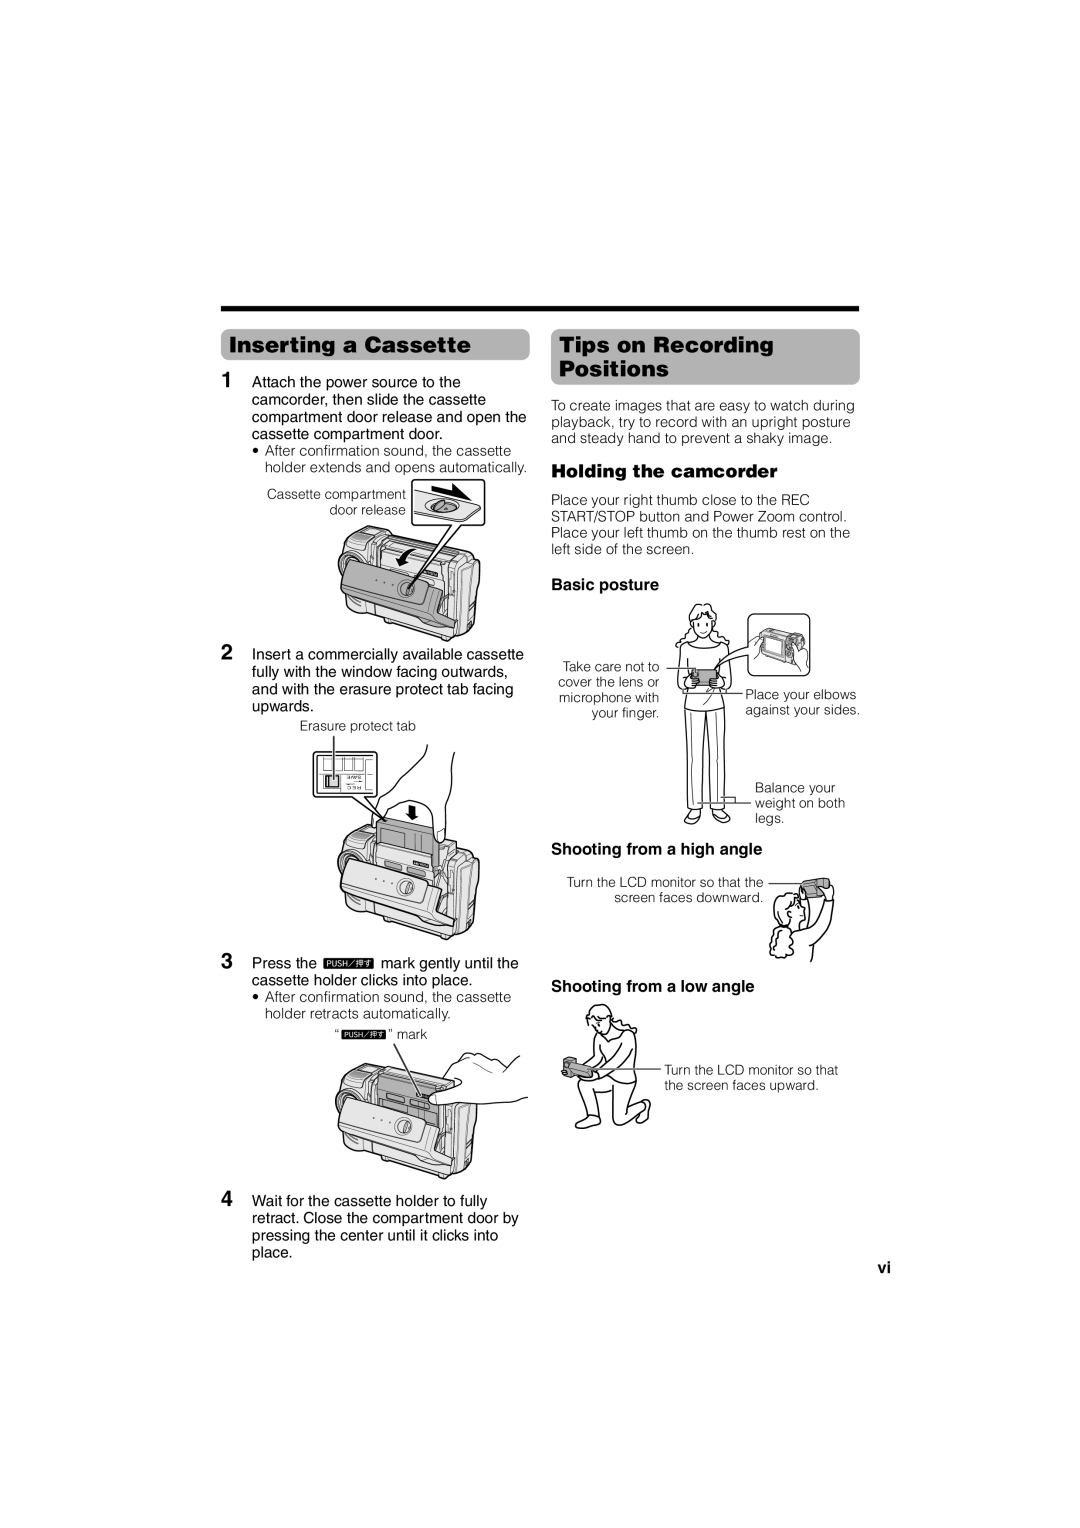 Sharp VL-NZ50U operation manual Inserting a Cassette, Tips on Recording Positions, Holding the camcorder 